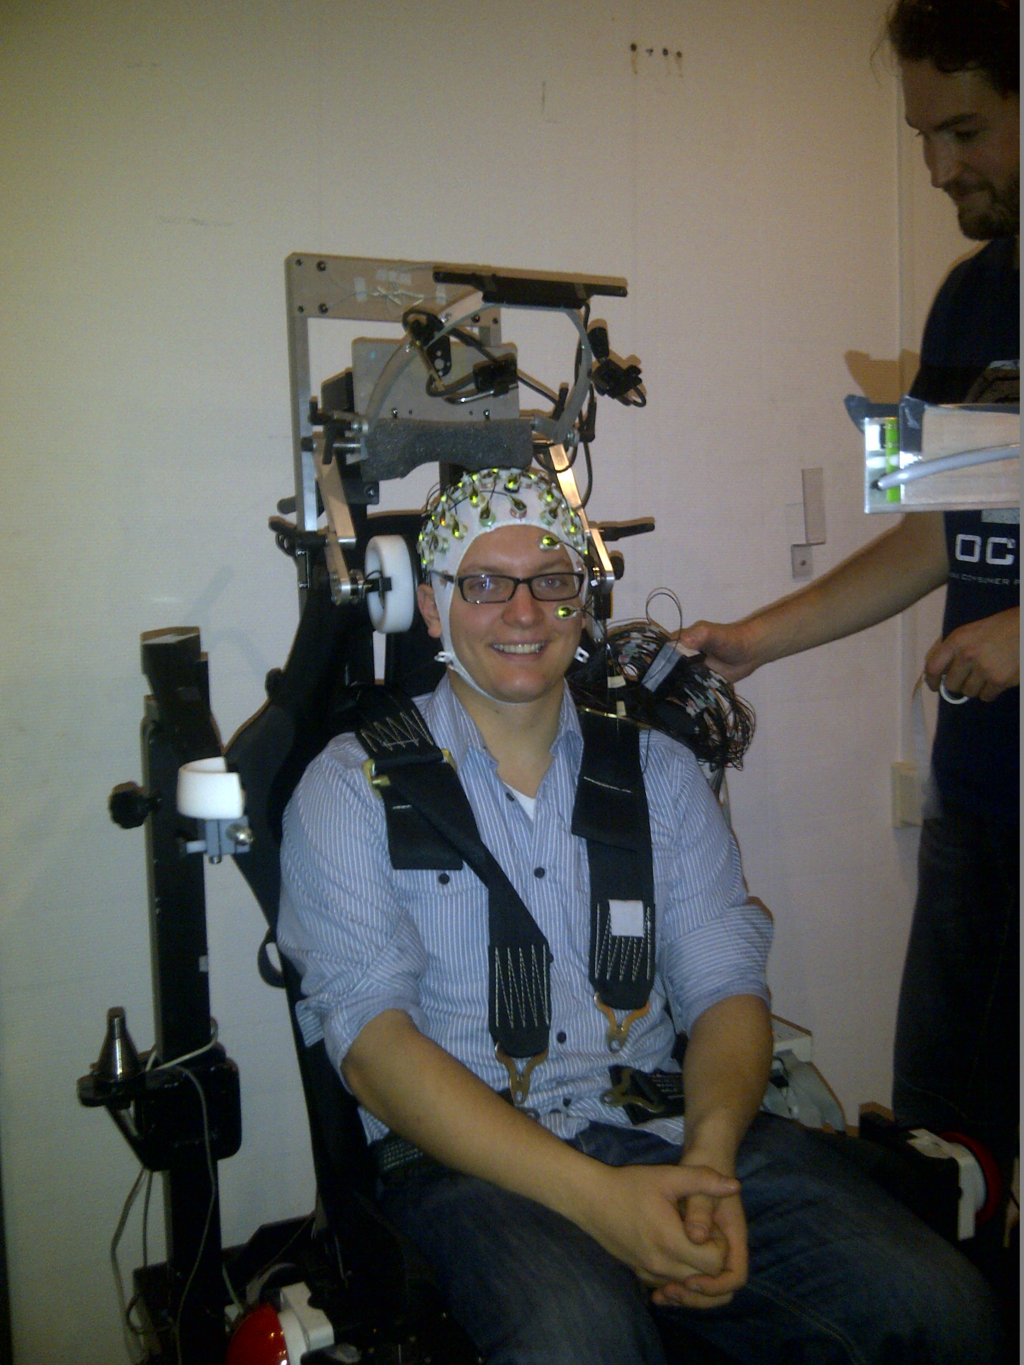 A person in a EEG set up ready to measure brain activity